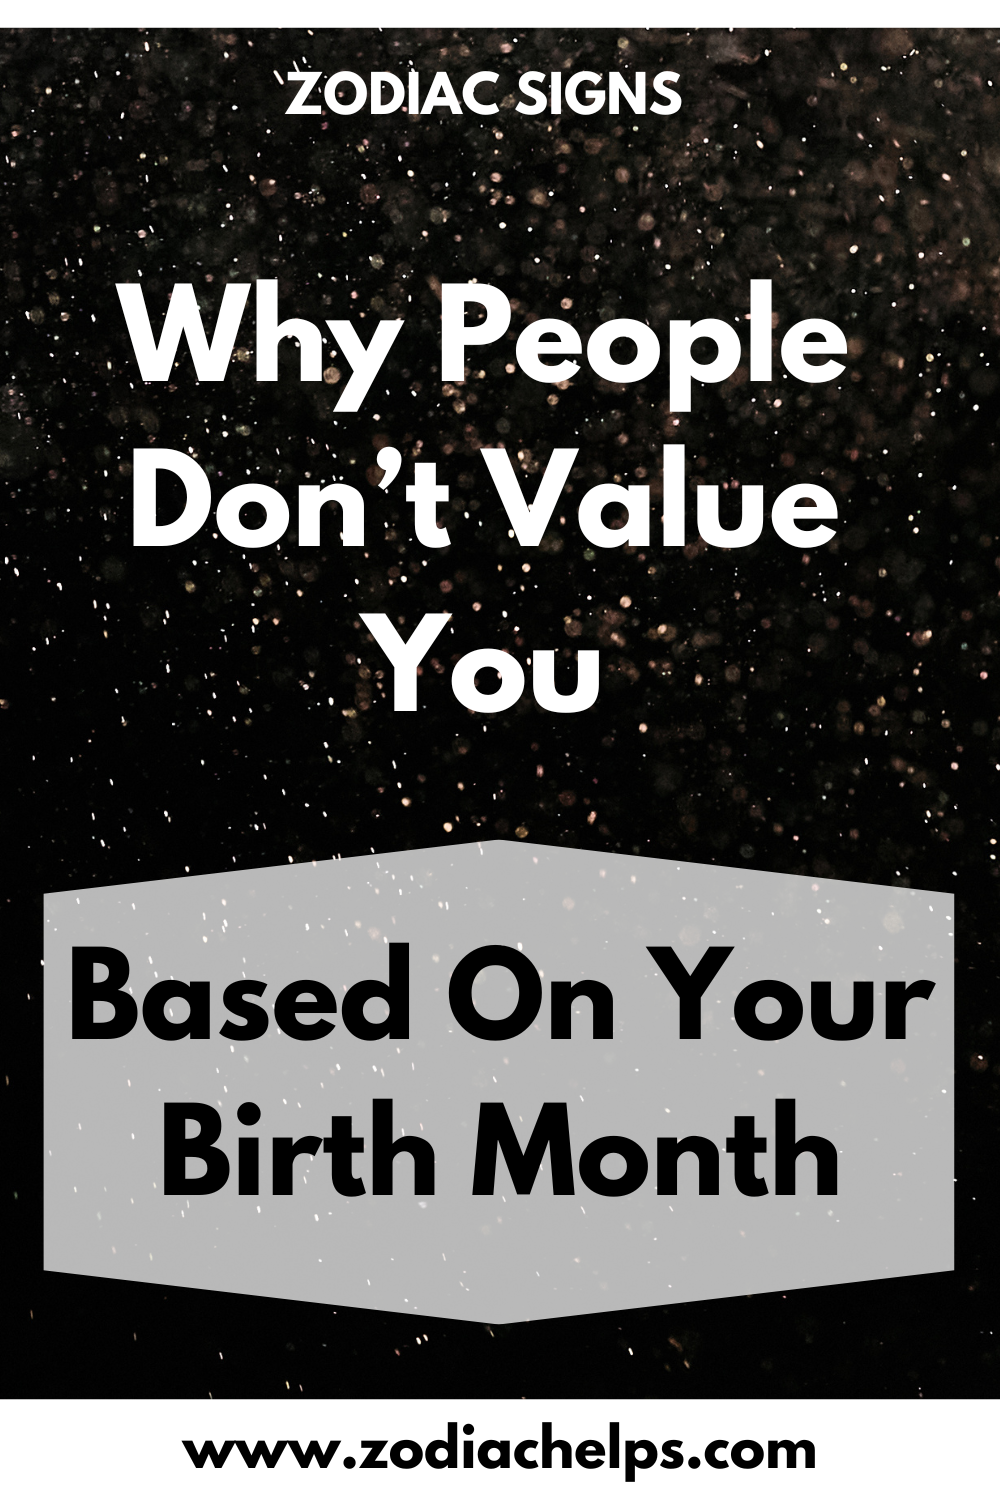 Why People Don’t Value You, Based On Your Birth Month